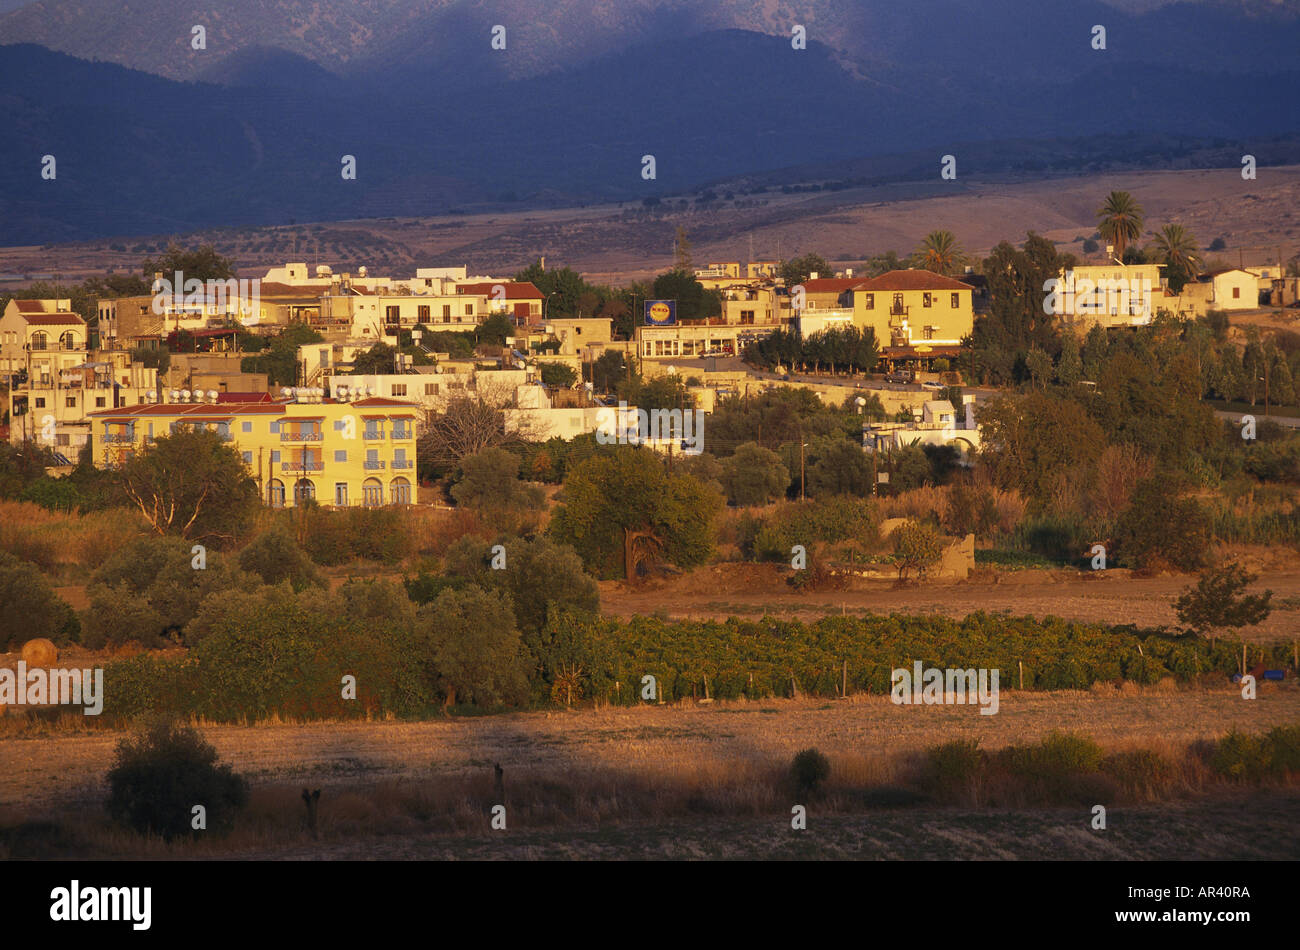 Polis village, in the backgrounsd foothills of Troodos mountains, Cyprus Stock Photo